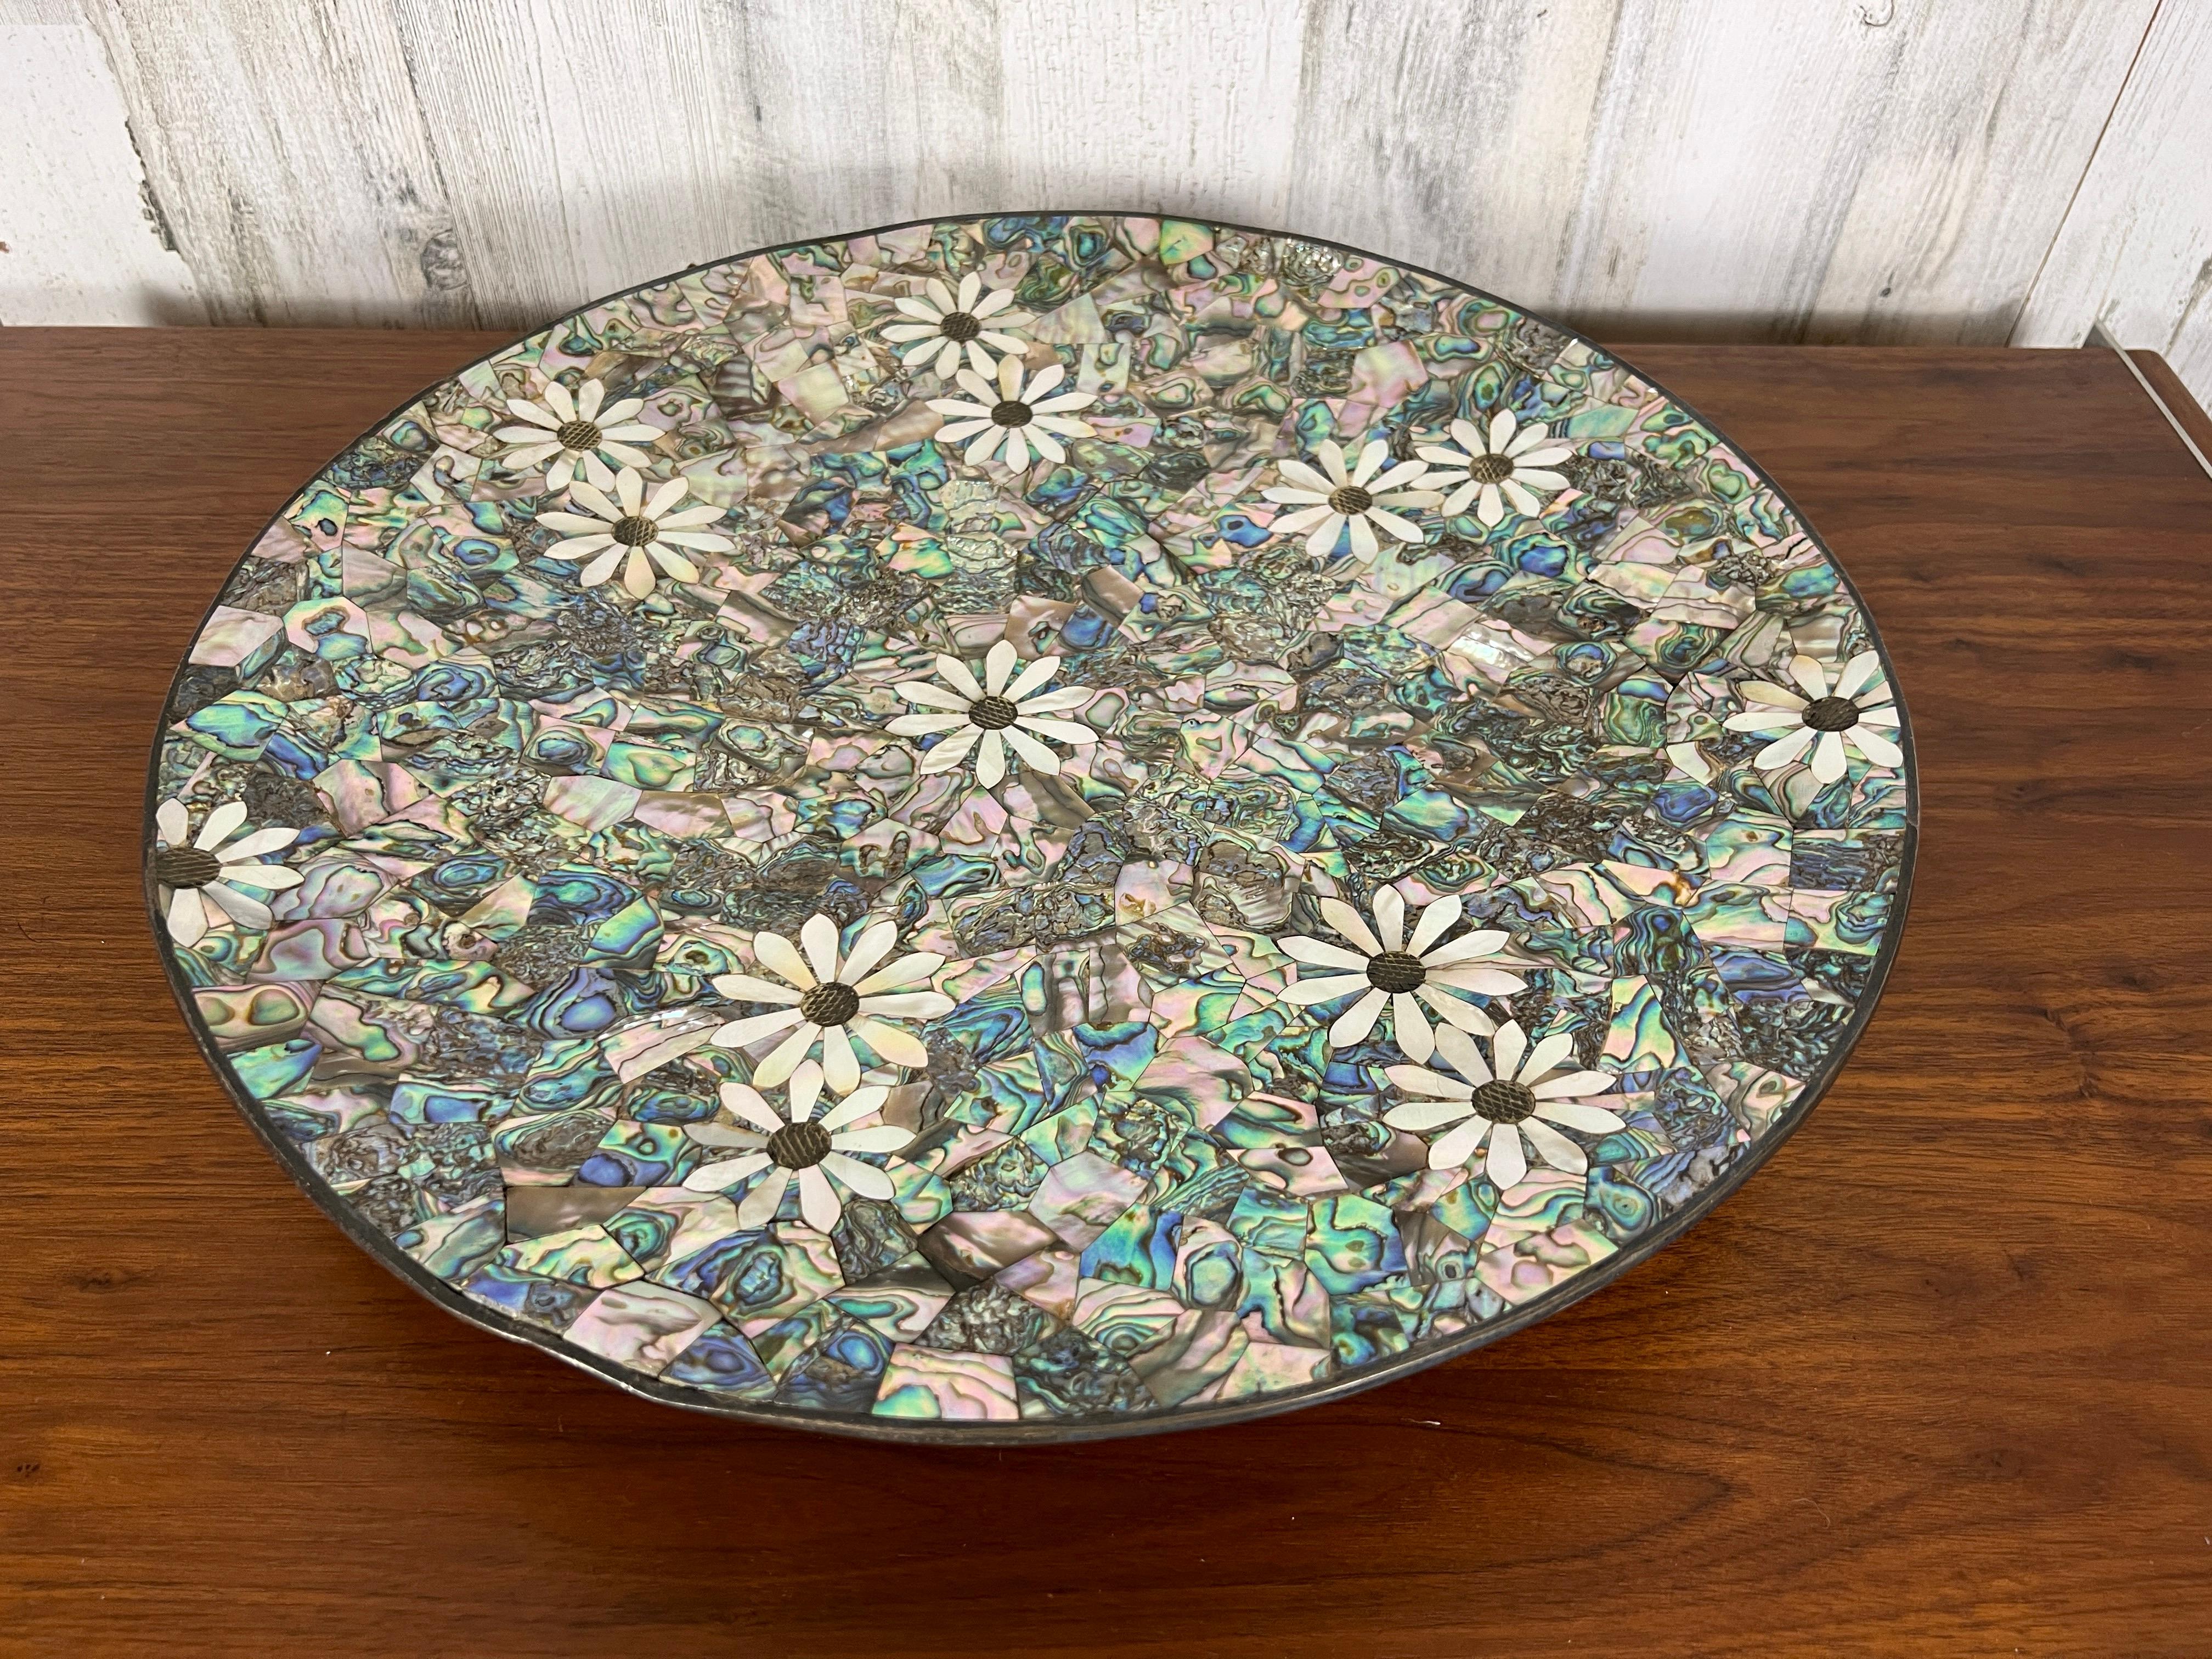 El Castillo Taxco Silver Plated Bowl with Abalone and Mother of Pearl Inlay 13